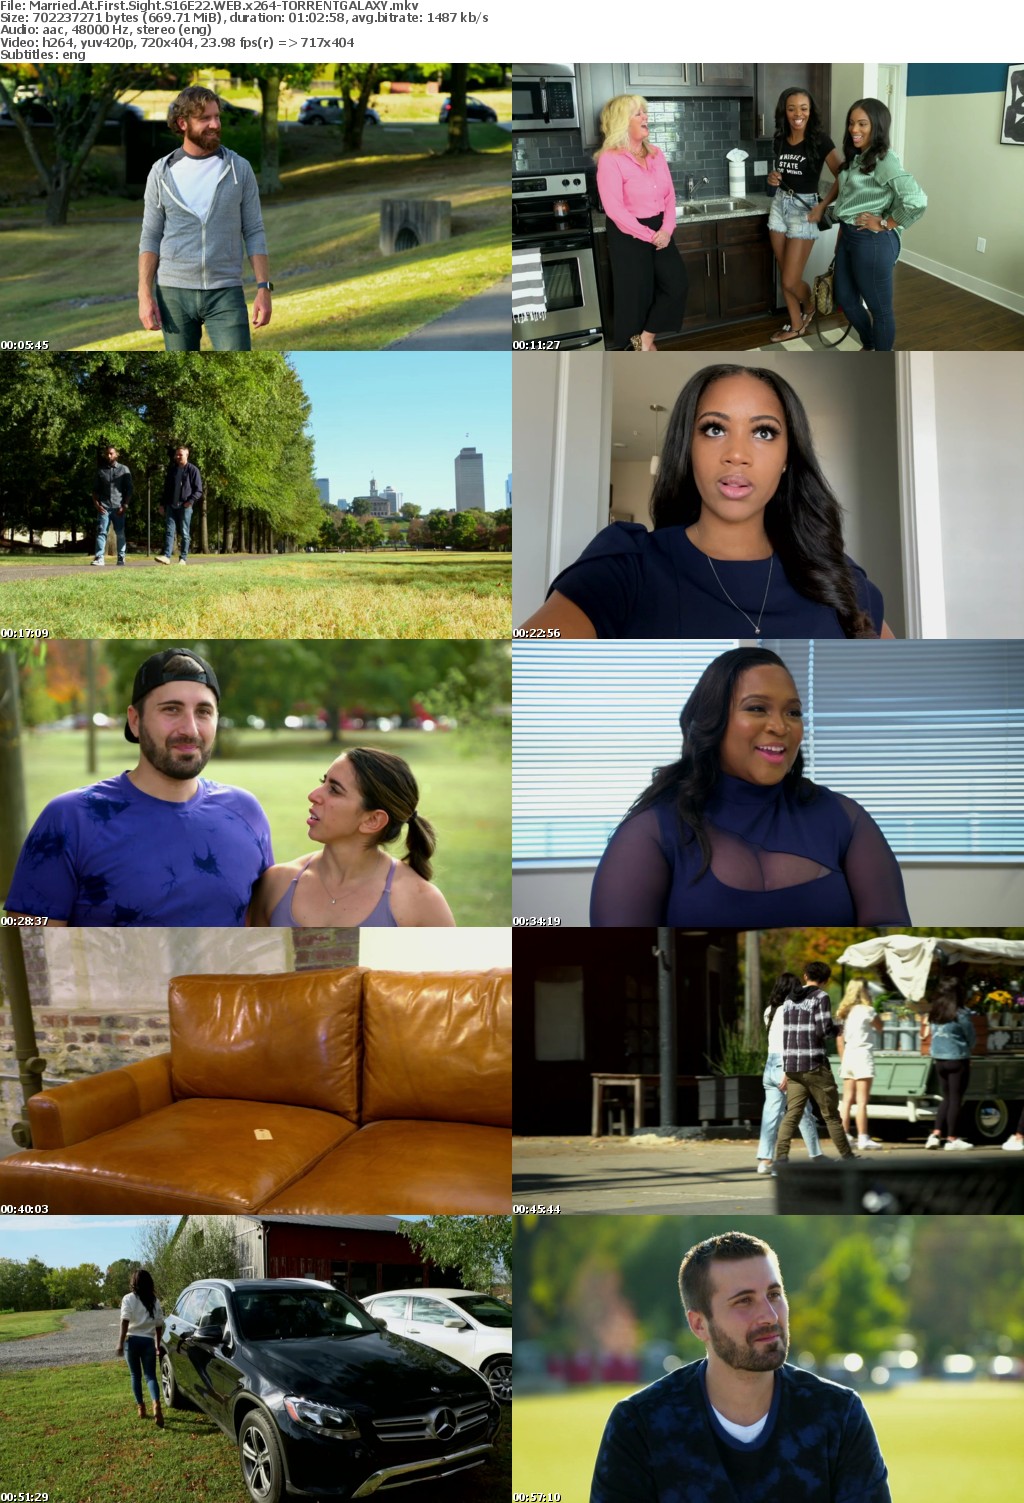 Married At First Sight S16E22 WEB x264-GALAXY